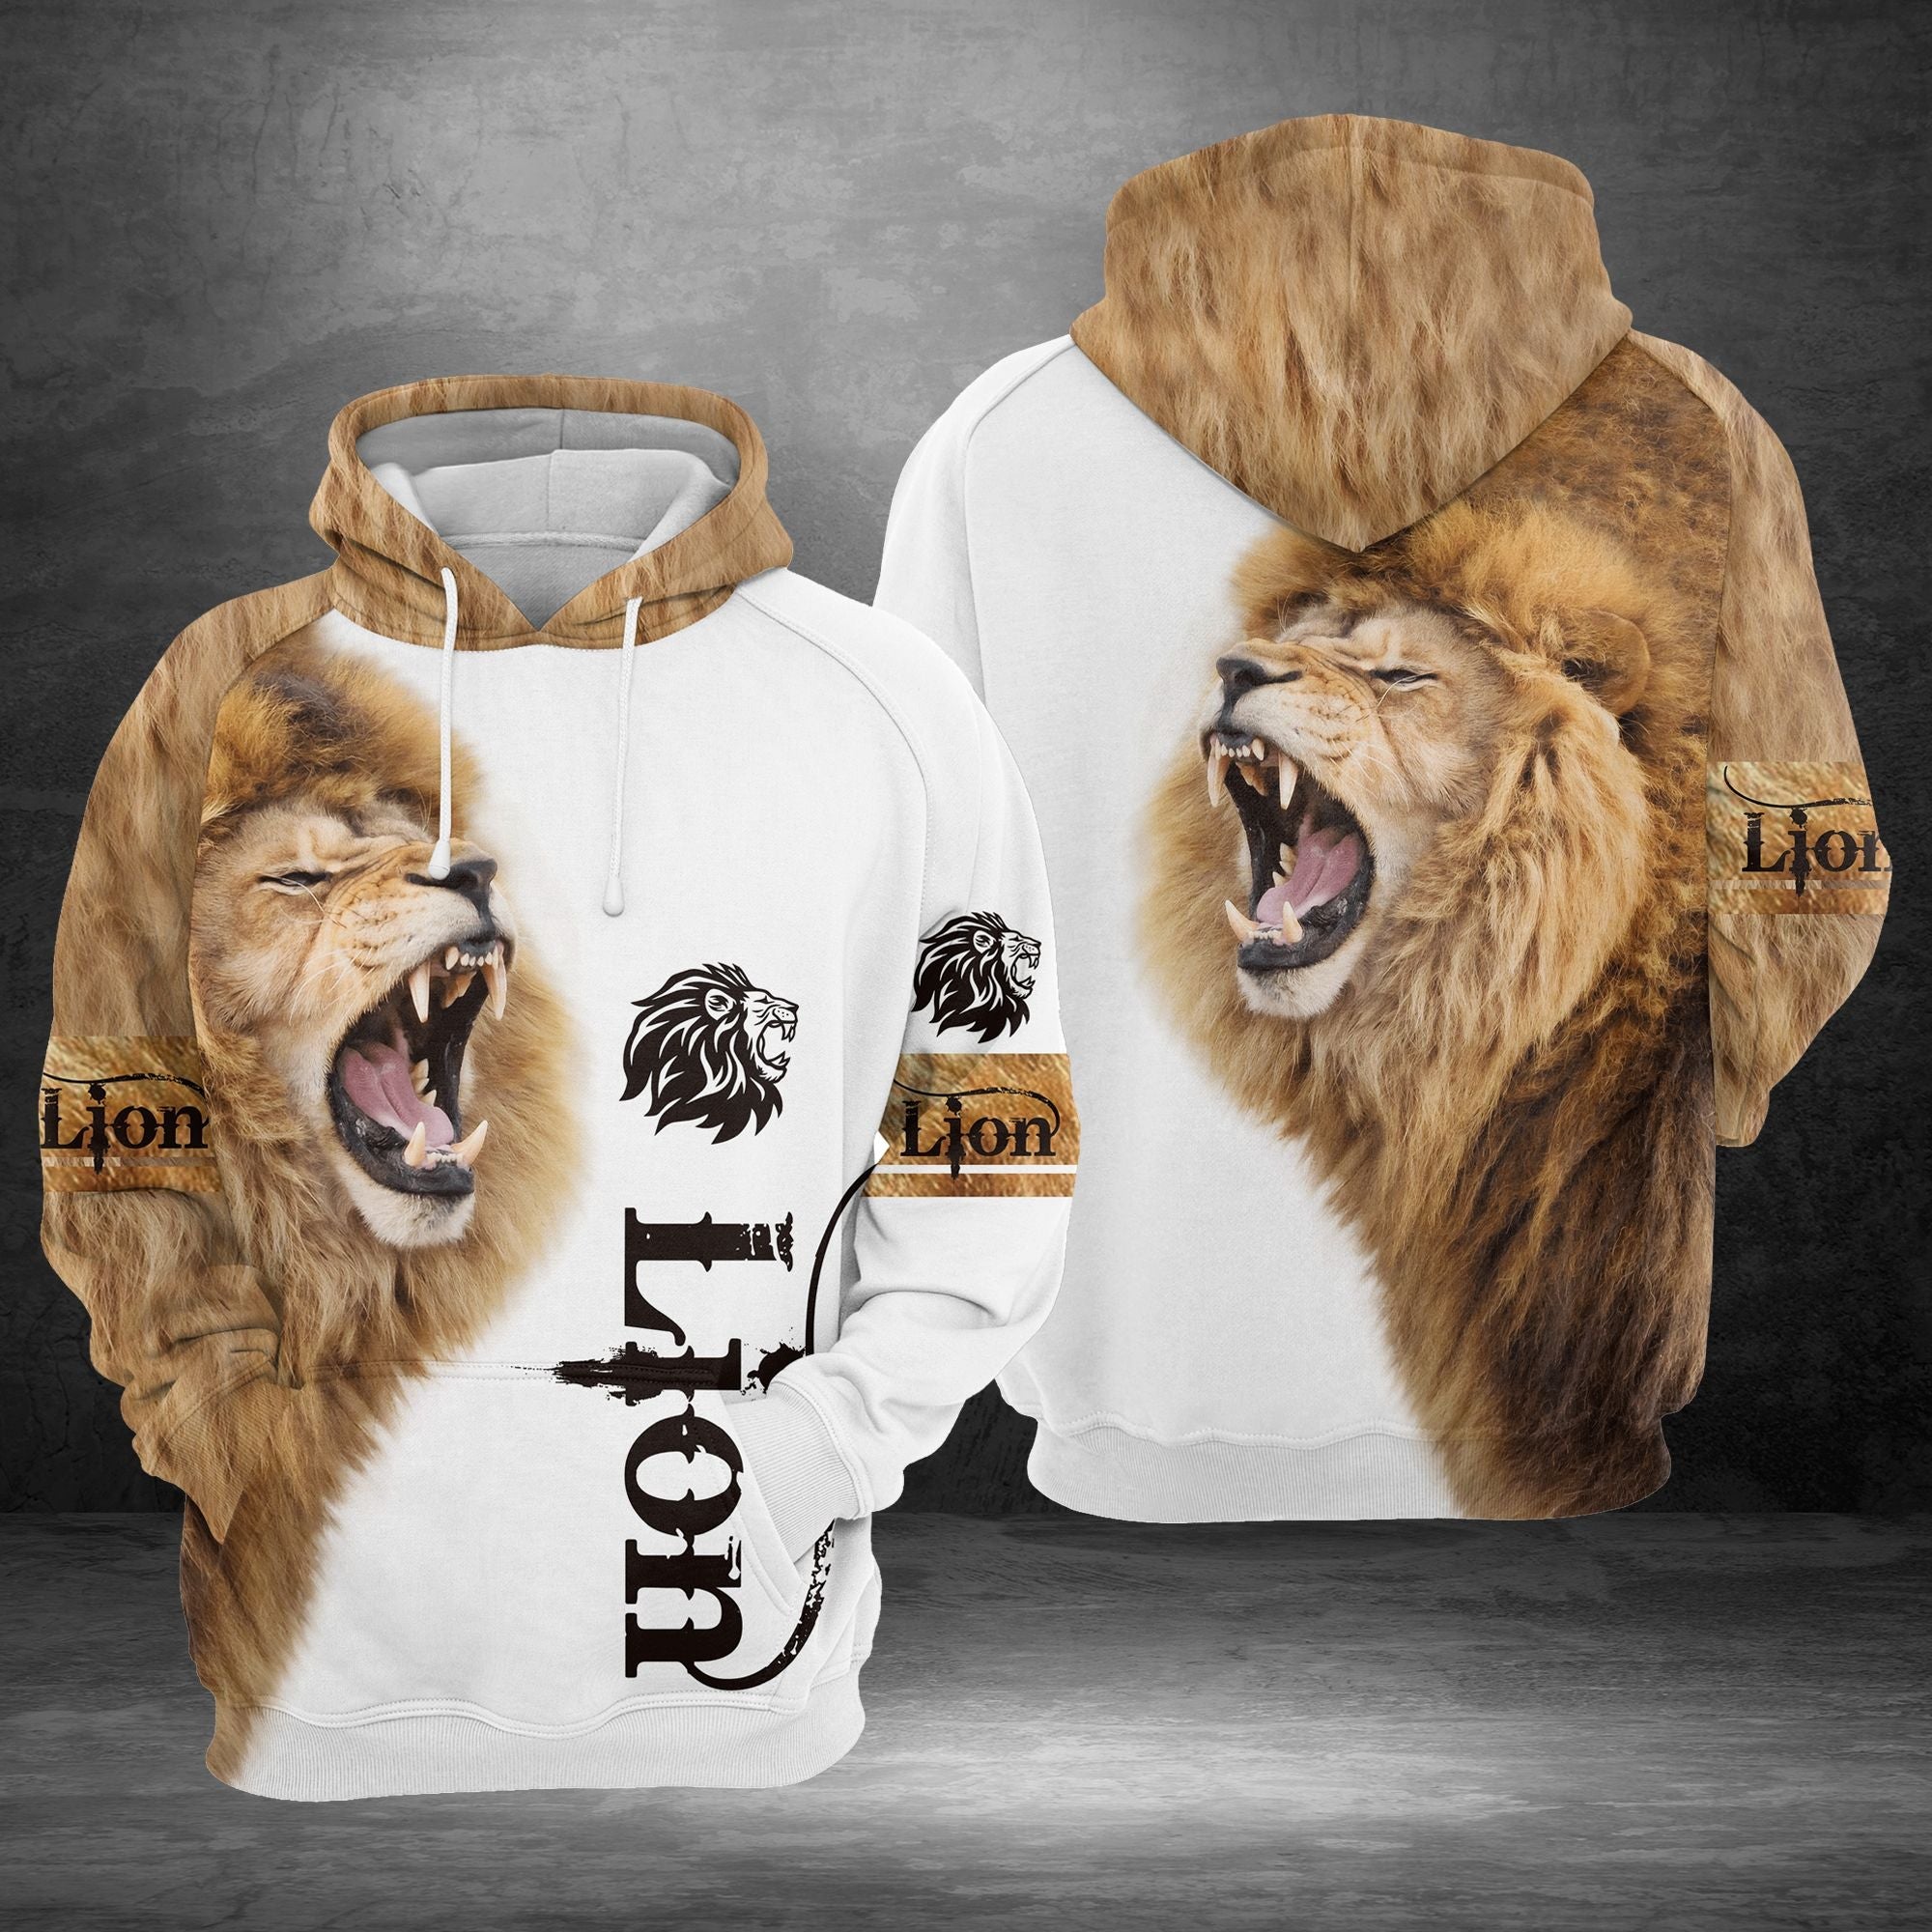 Lion Pullover Premium Hoodie, Perfect Outfit For Men And Women On Christmas New Year Autumn Winter